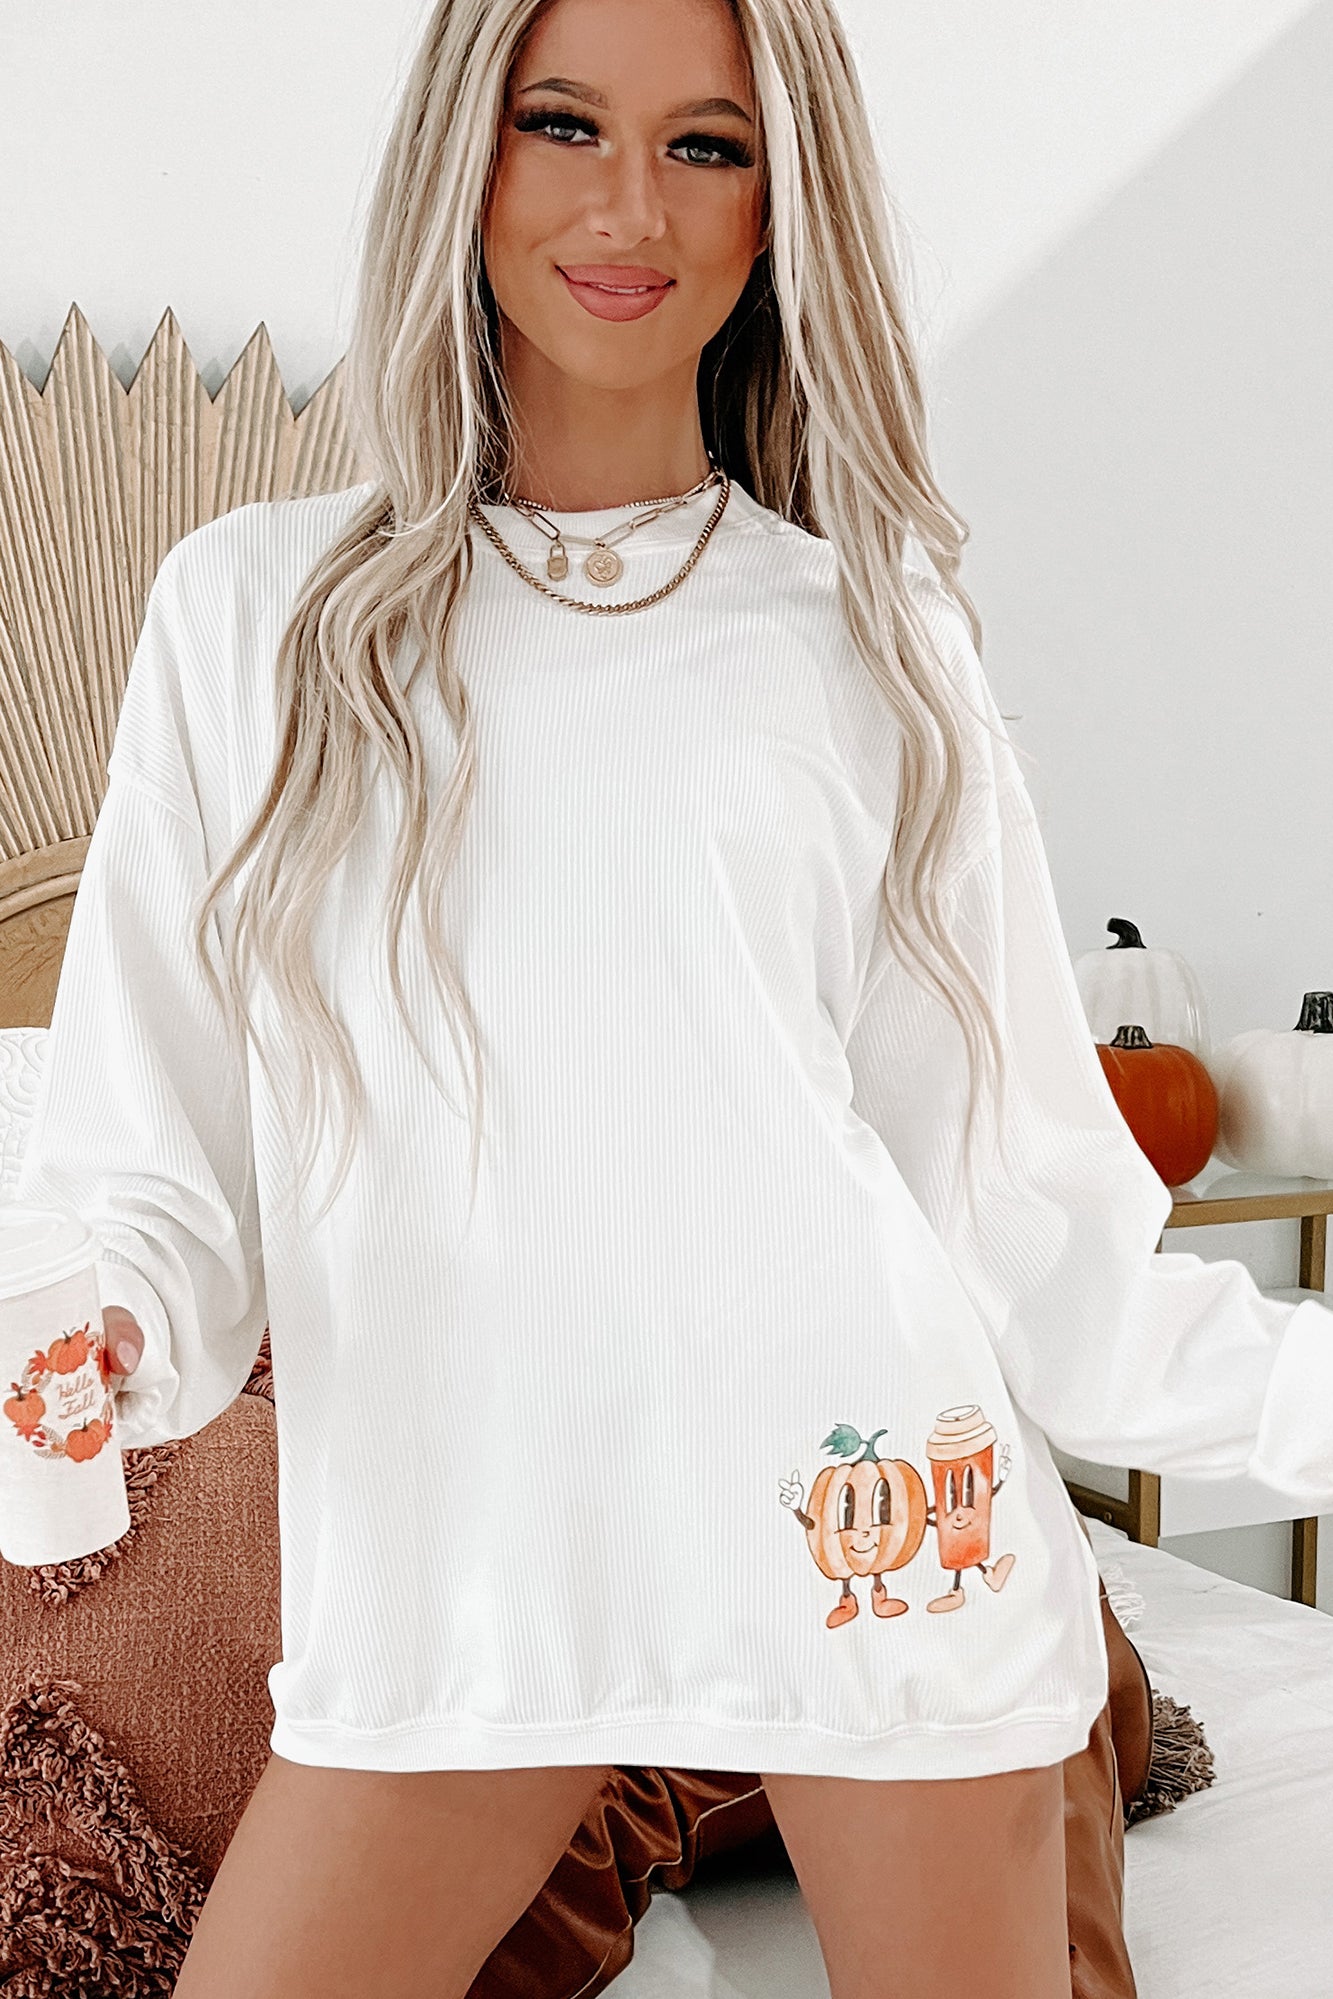 Fall Friends Double-Sided Corded Graphic Crewneck (White) - Print On Demand - NanaMacs